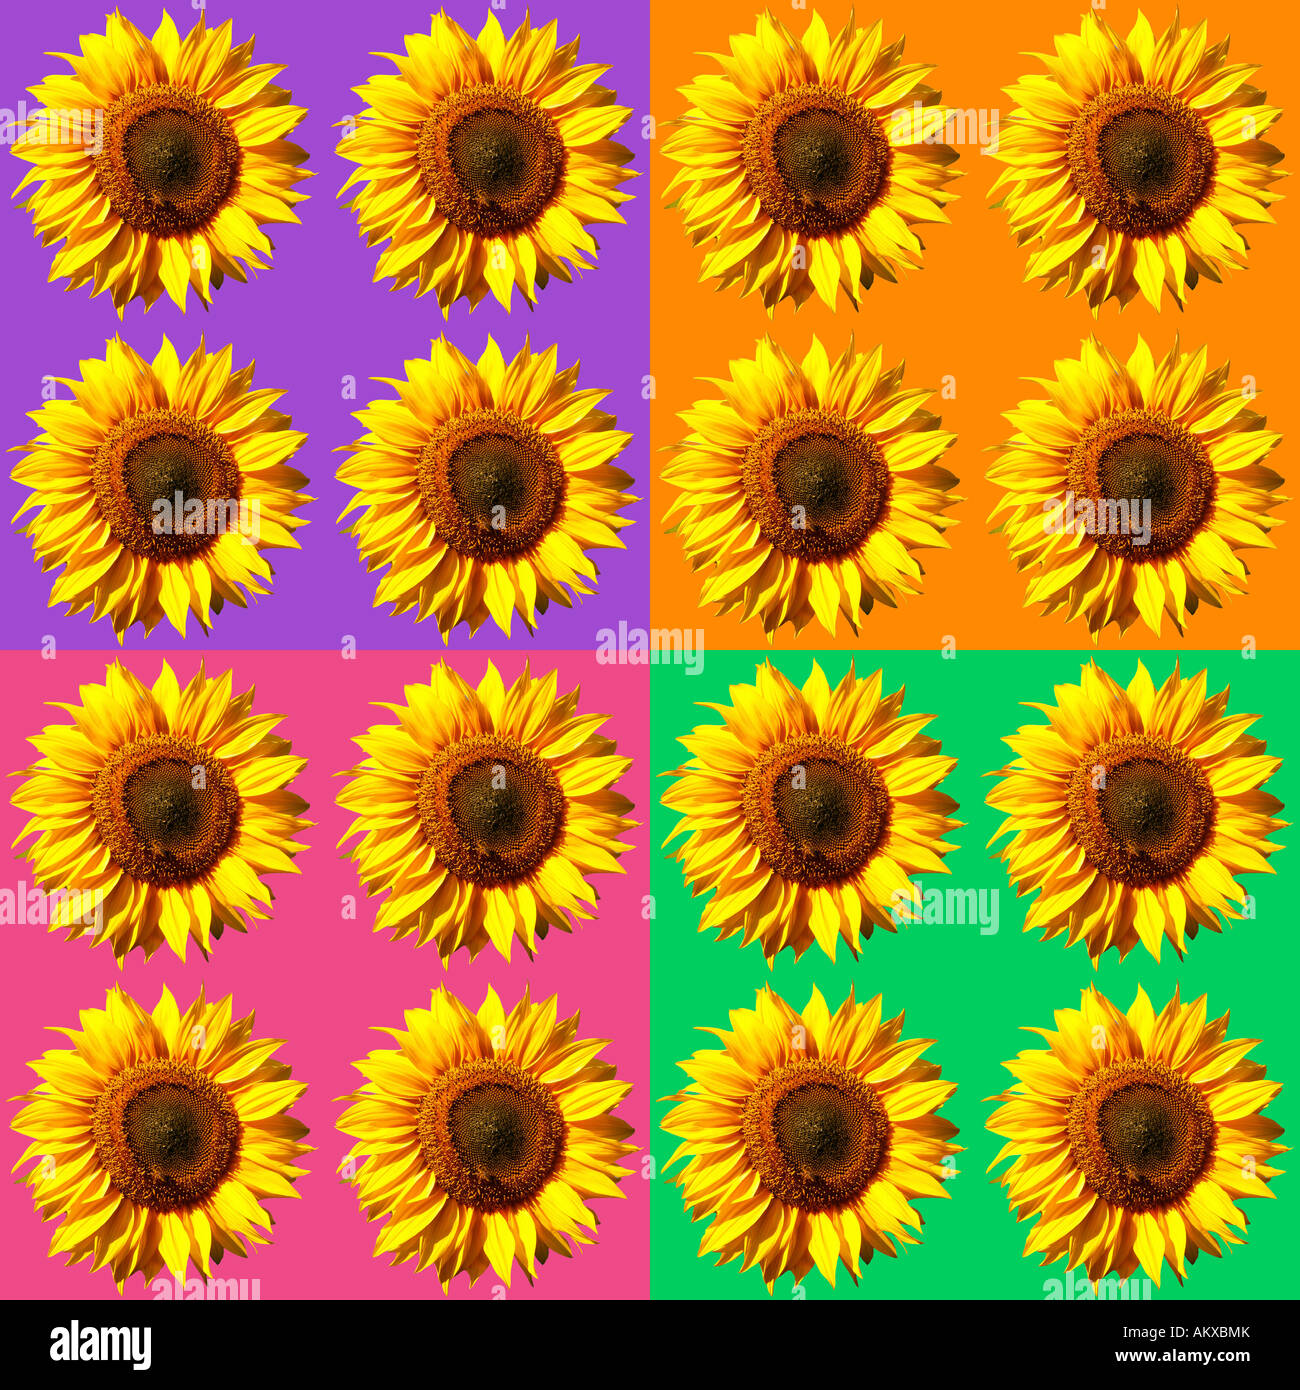 Sunflower pattern, colorful, background, poster, pattern Stock Photo